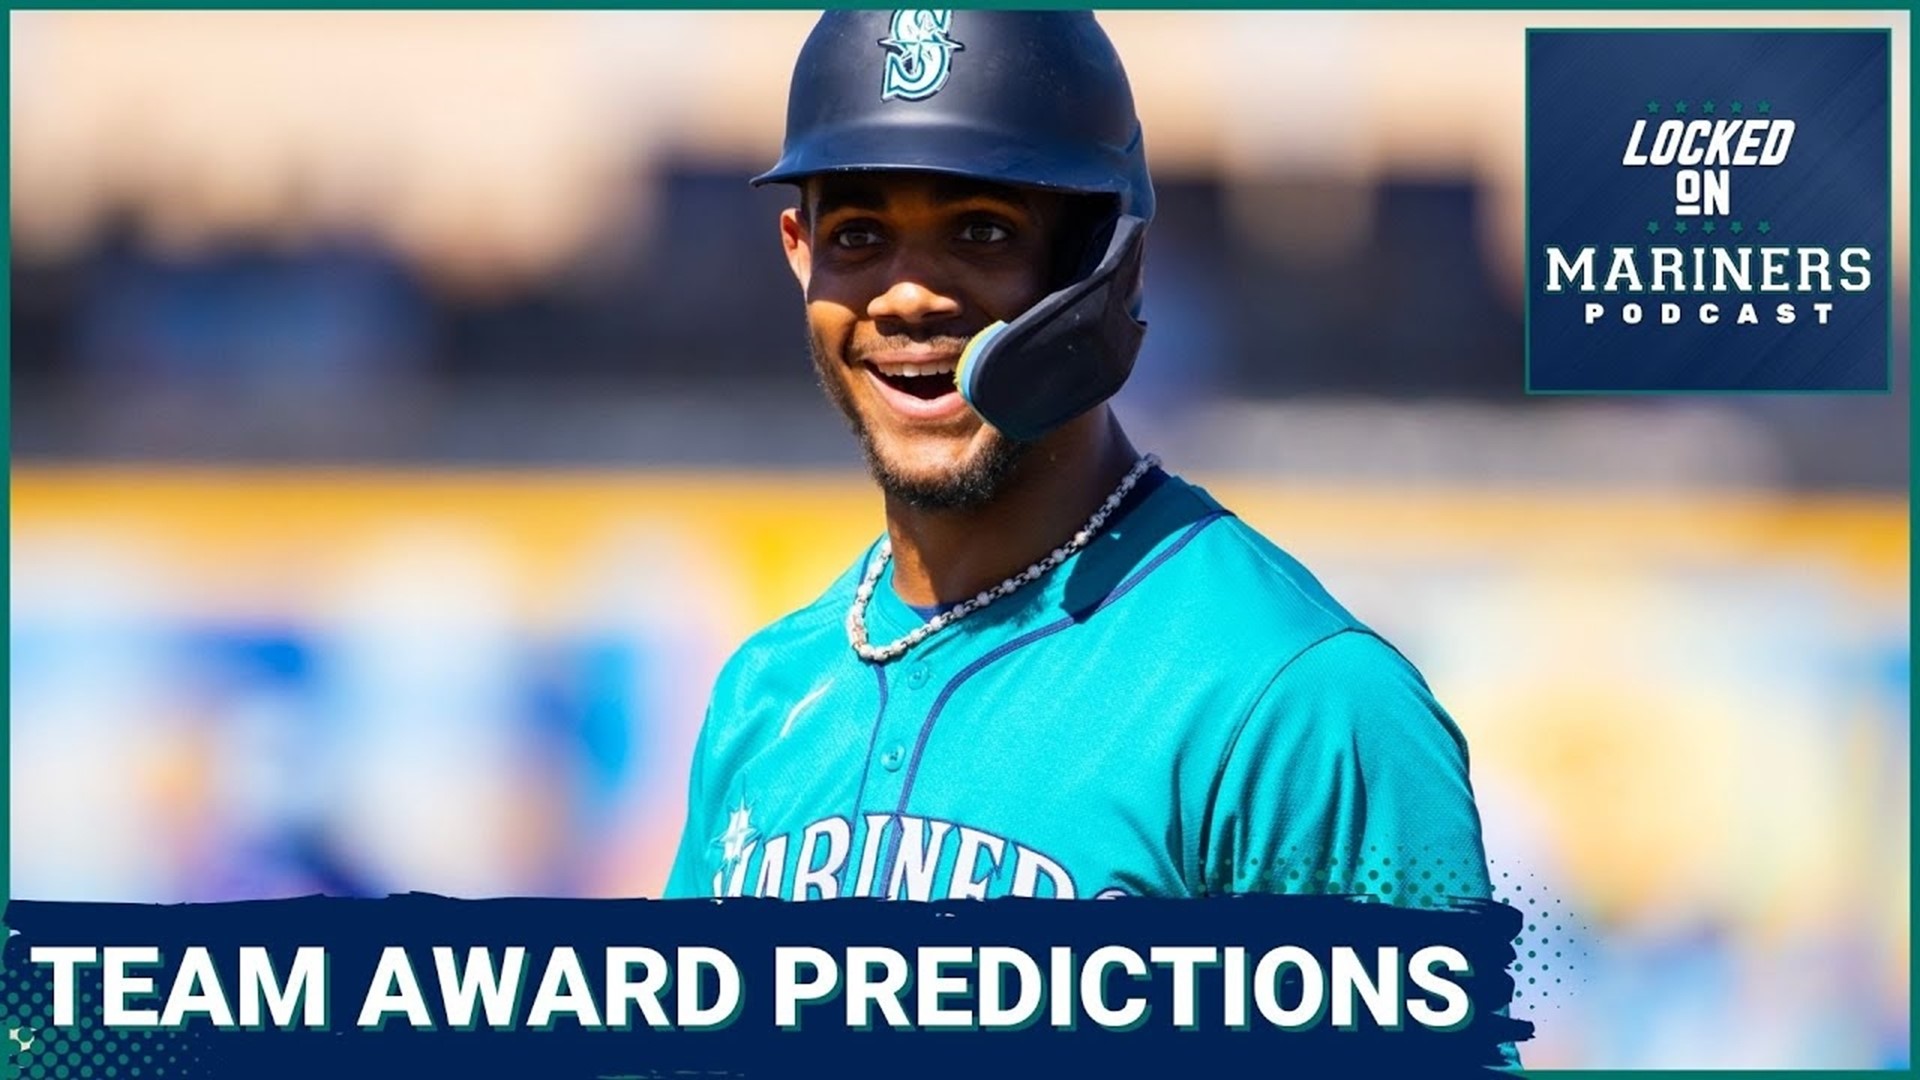 Ty and Colby make their predictions for the Mariners' MVP, Cy Young, Reliever of the Year, Rookie of the Year, and Breakout Player in 2024.